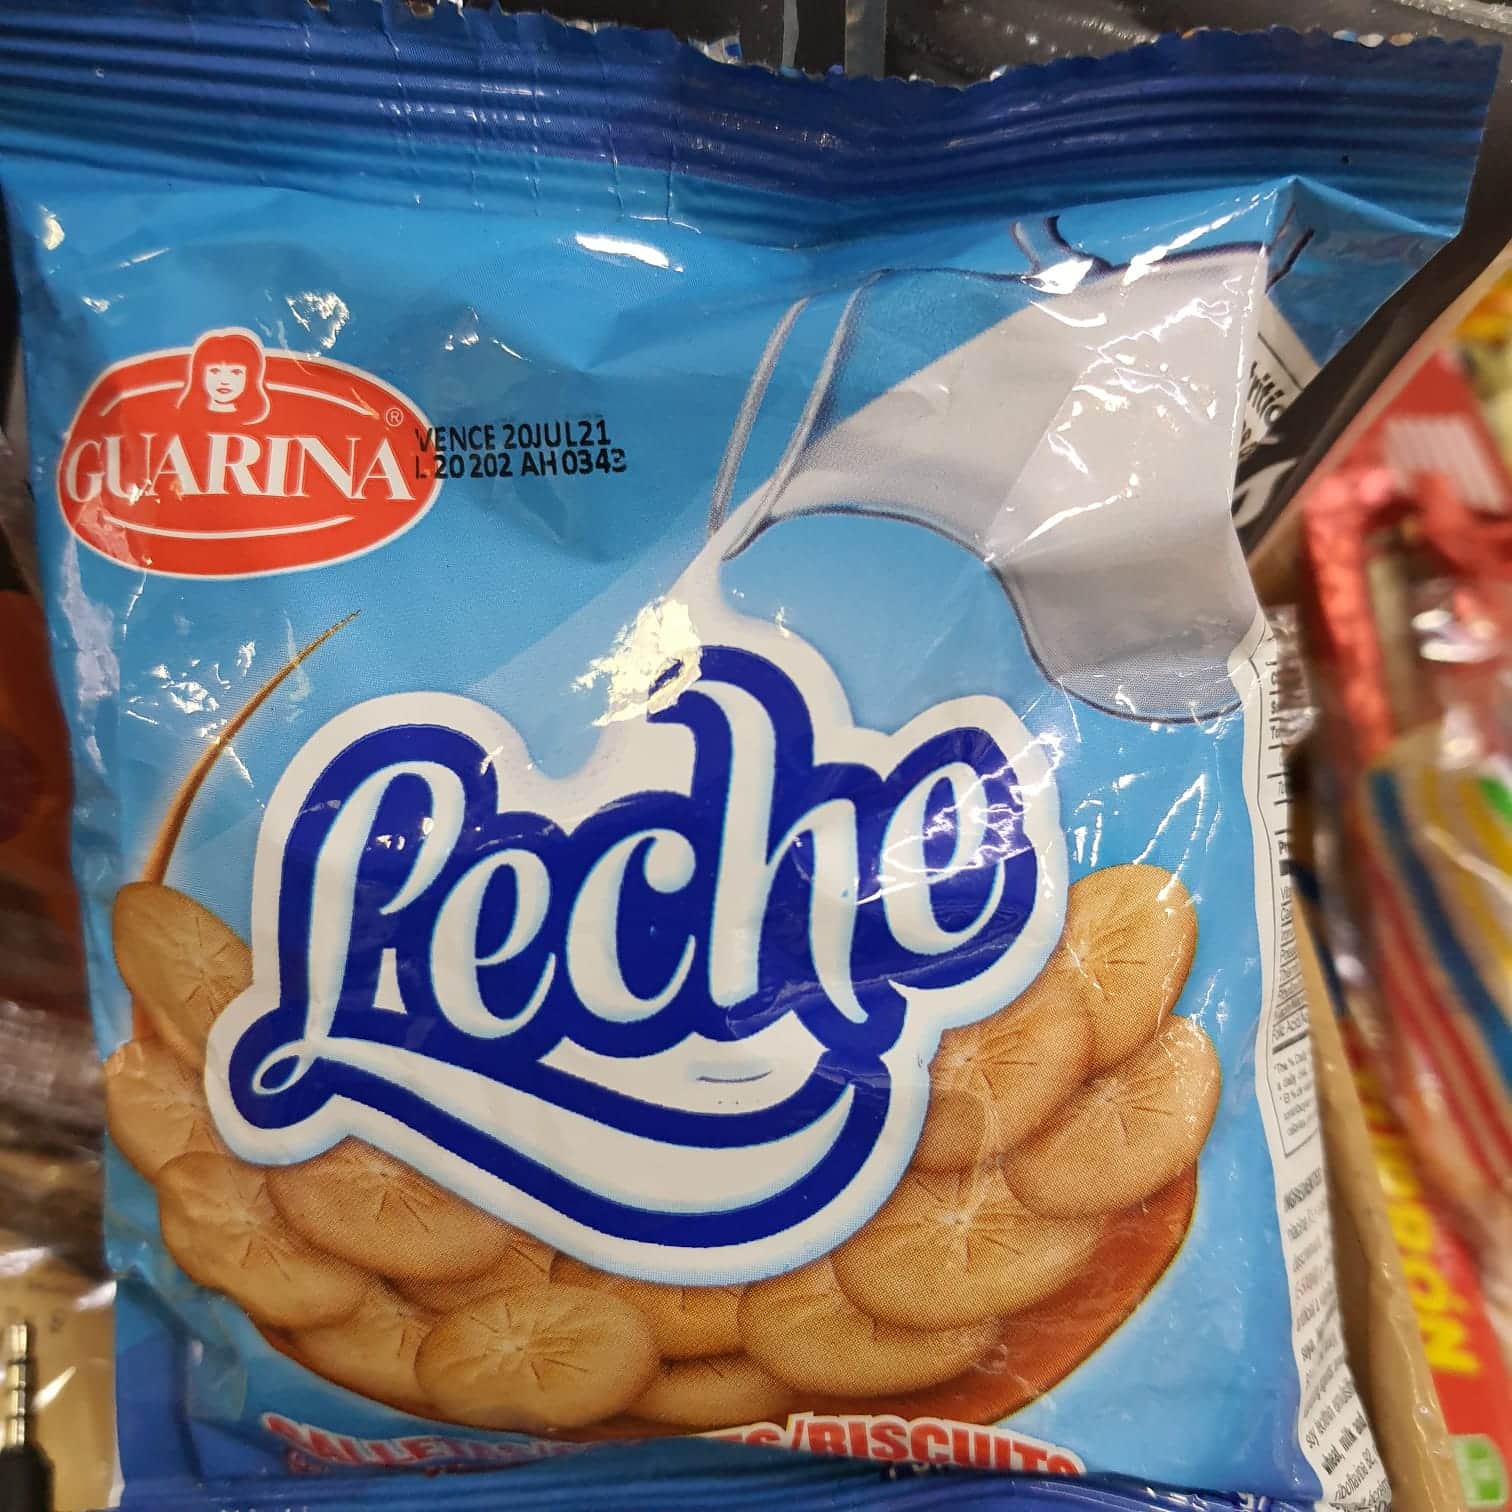 Dominican products in European market